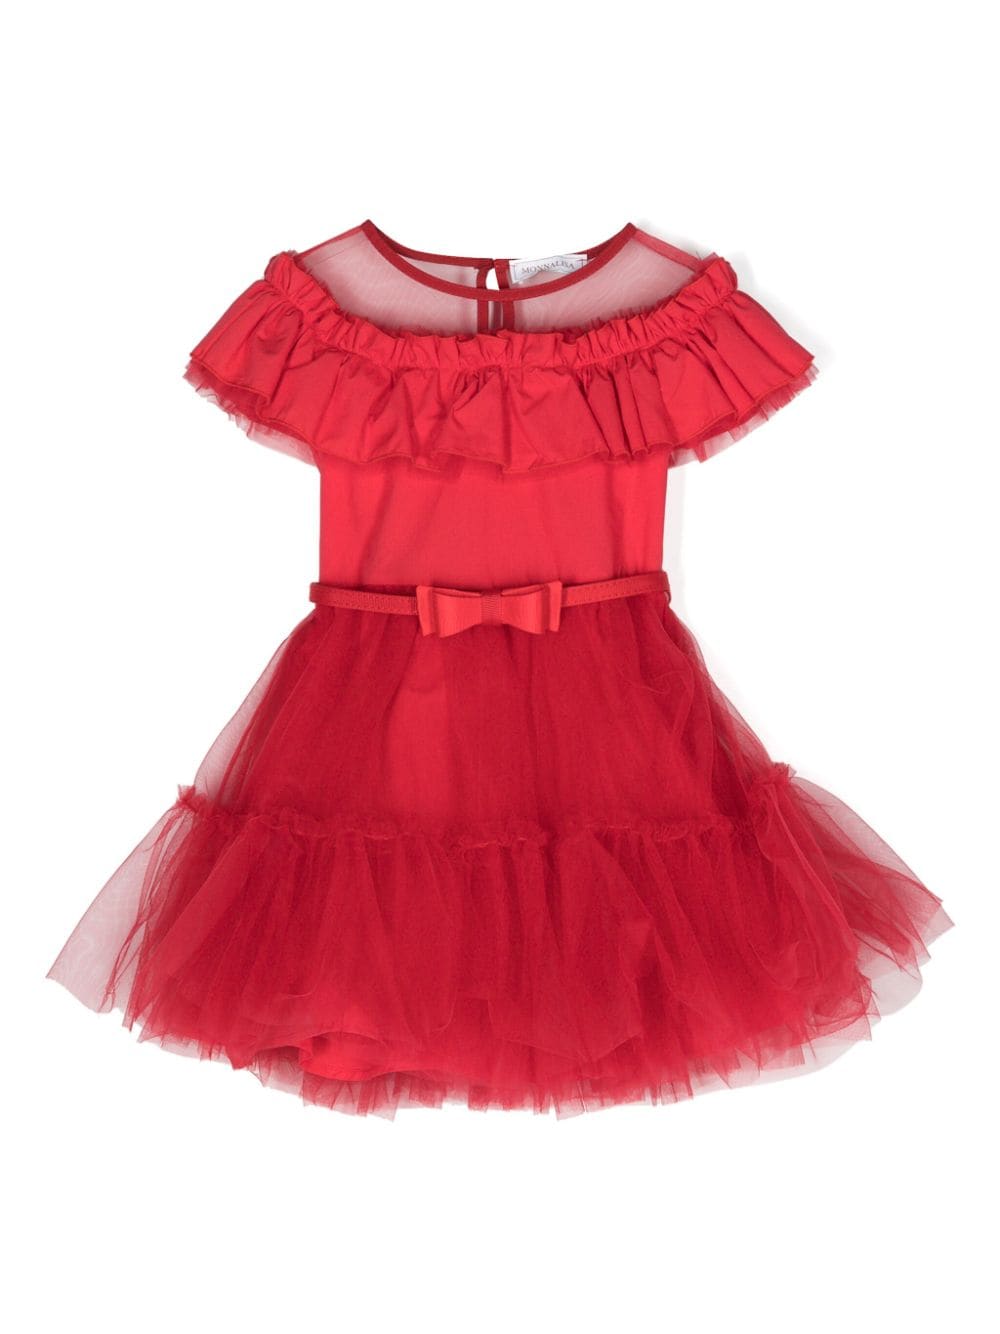 Ruffled tulle dress<BR/><BR/>